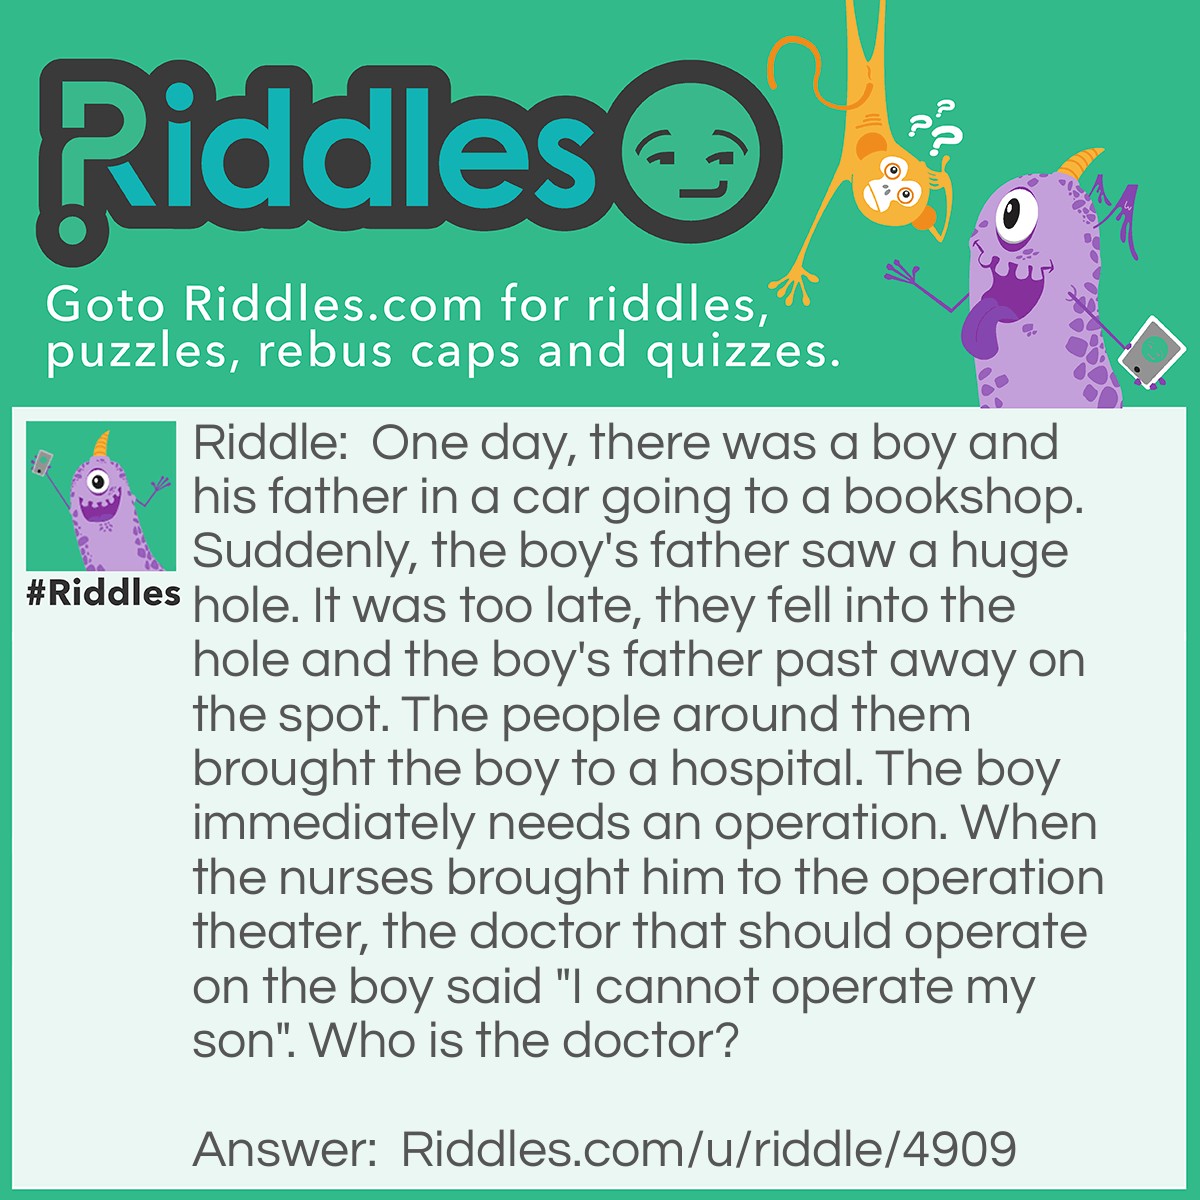 Riddle: One day, there was a boy and his father in a car going to a bookshop. Suddenly, the boy's father saw a huge hole. It was too late, they fell into the hole and the boy's father past away on the spot. The people around them brought the boy to a hospital. The boy immediately needs an operation. When the nurses brought him to the operation theater, the doctor that should operate on the boy said "I cannot operate my son". Who is the doctor? Answer: The boy's mother.